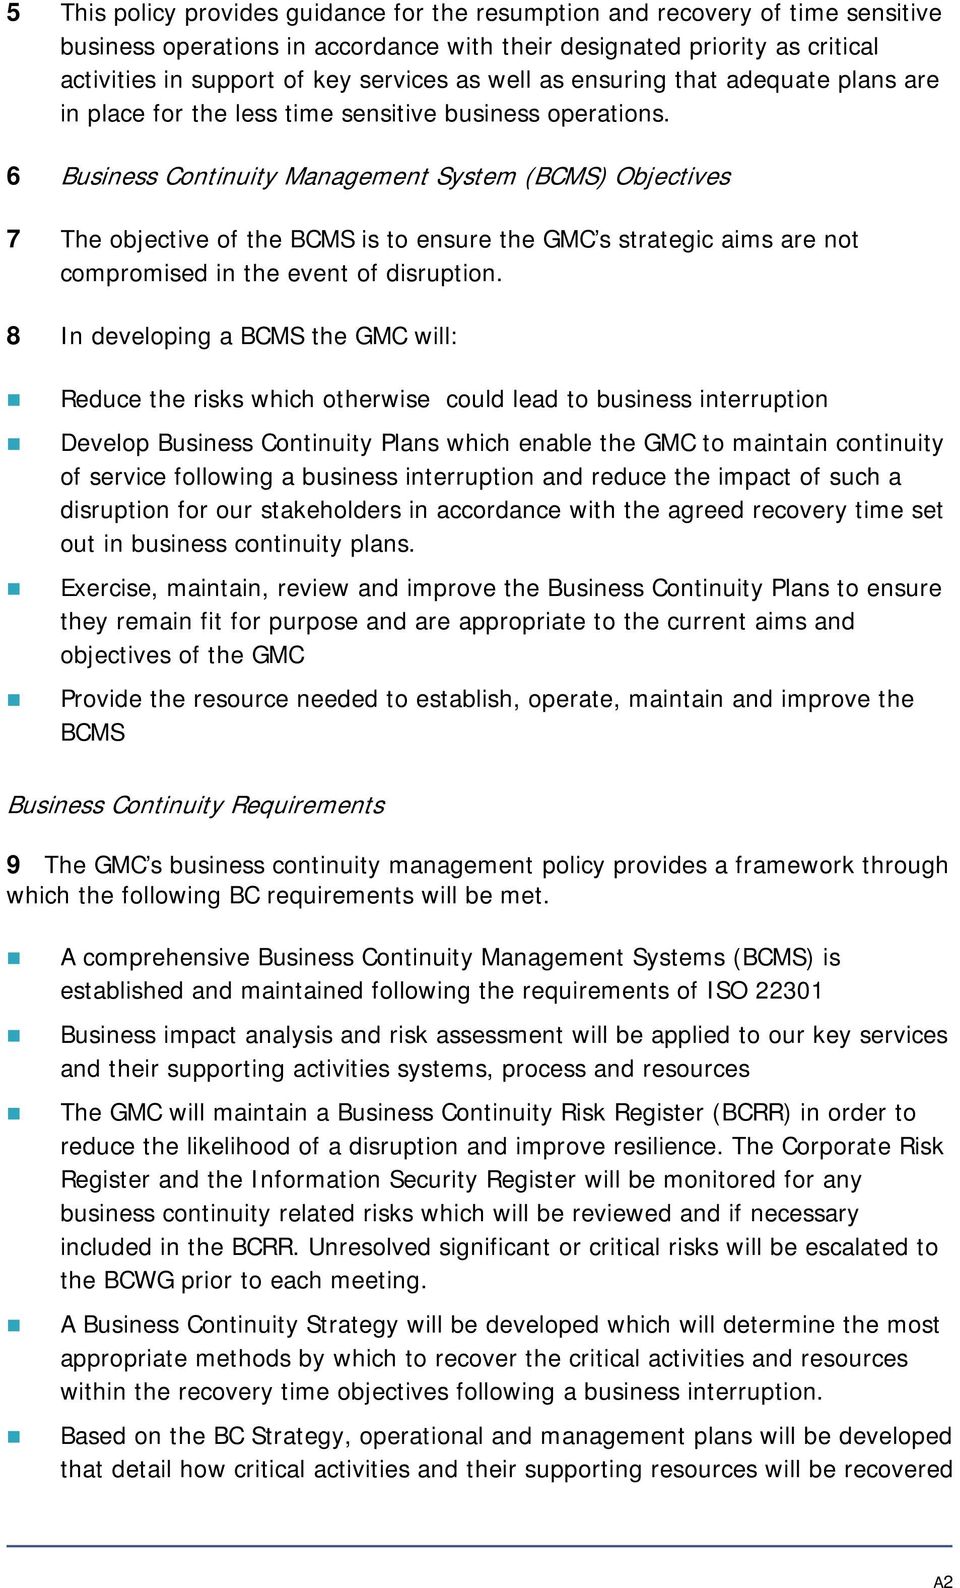 6 Business Continuity Management System (BCMS) Objectives 7 The objective of the BCMS is to ensure the GMC s strategic aims are not compromised in the event of disruption.